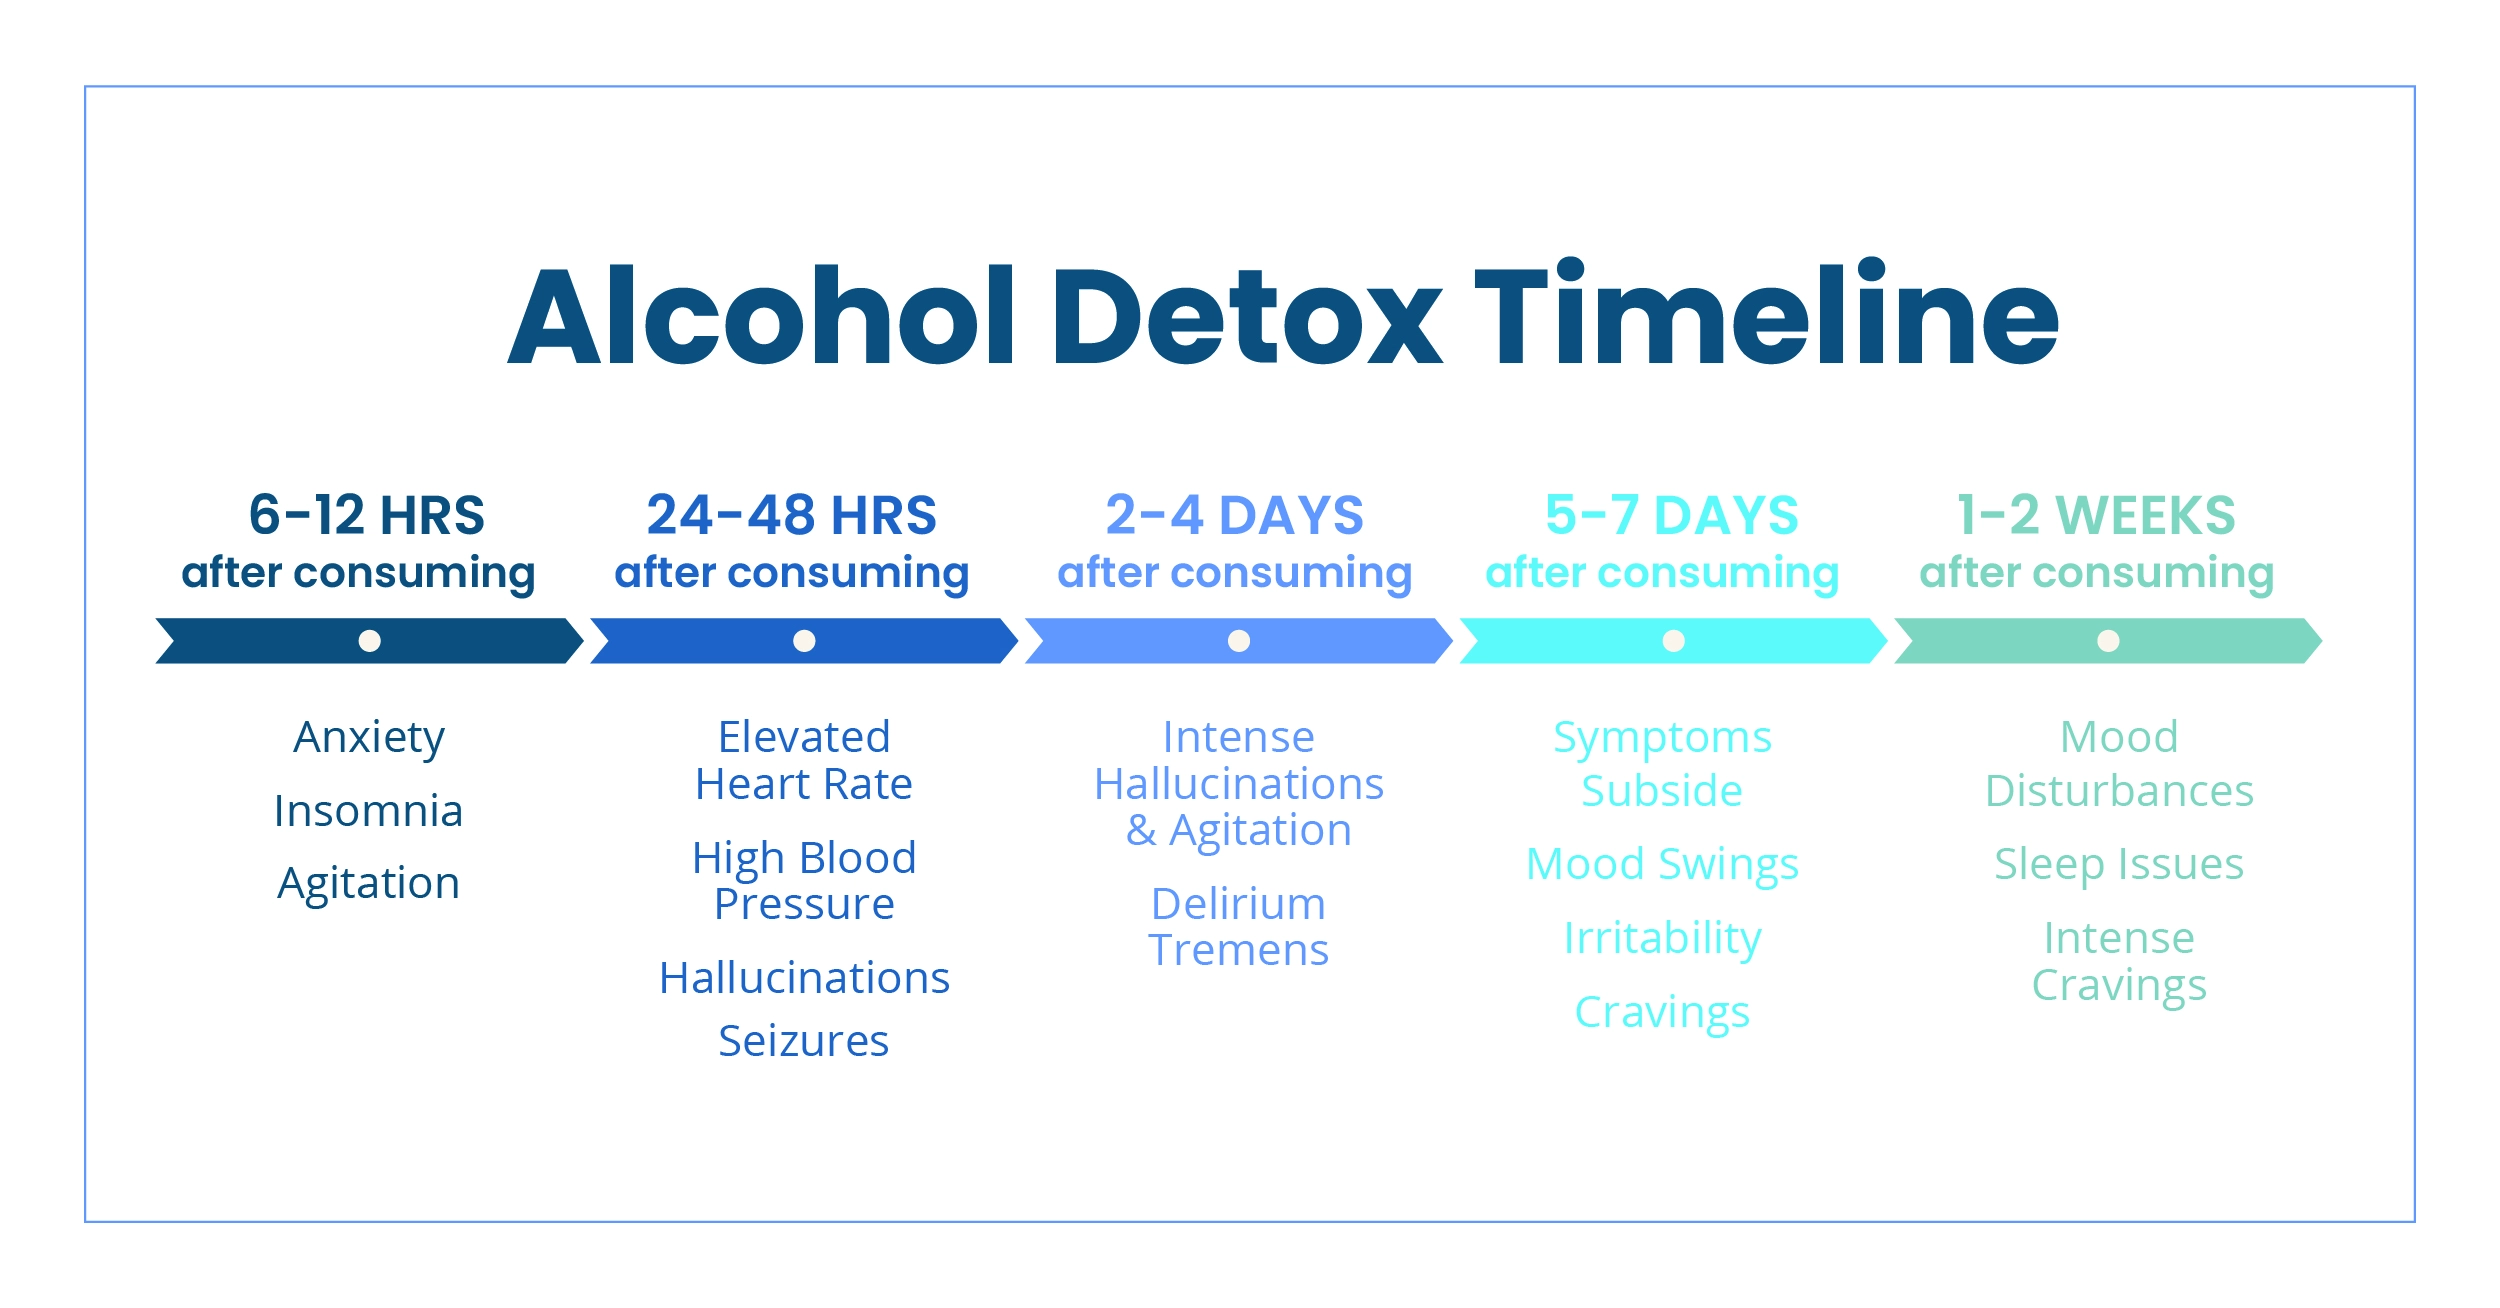 Graphic depiction of the alcohol detox timeline starting from 6 hours after consumption through two weeks after consumption.